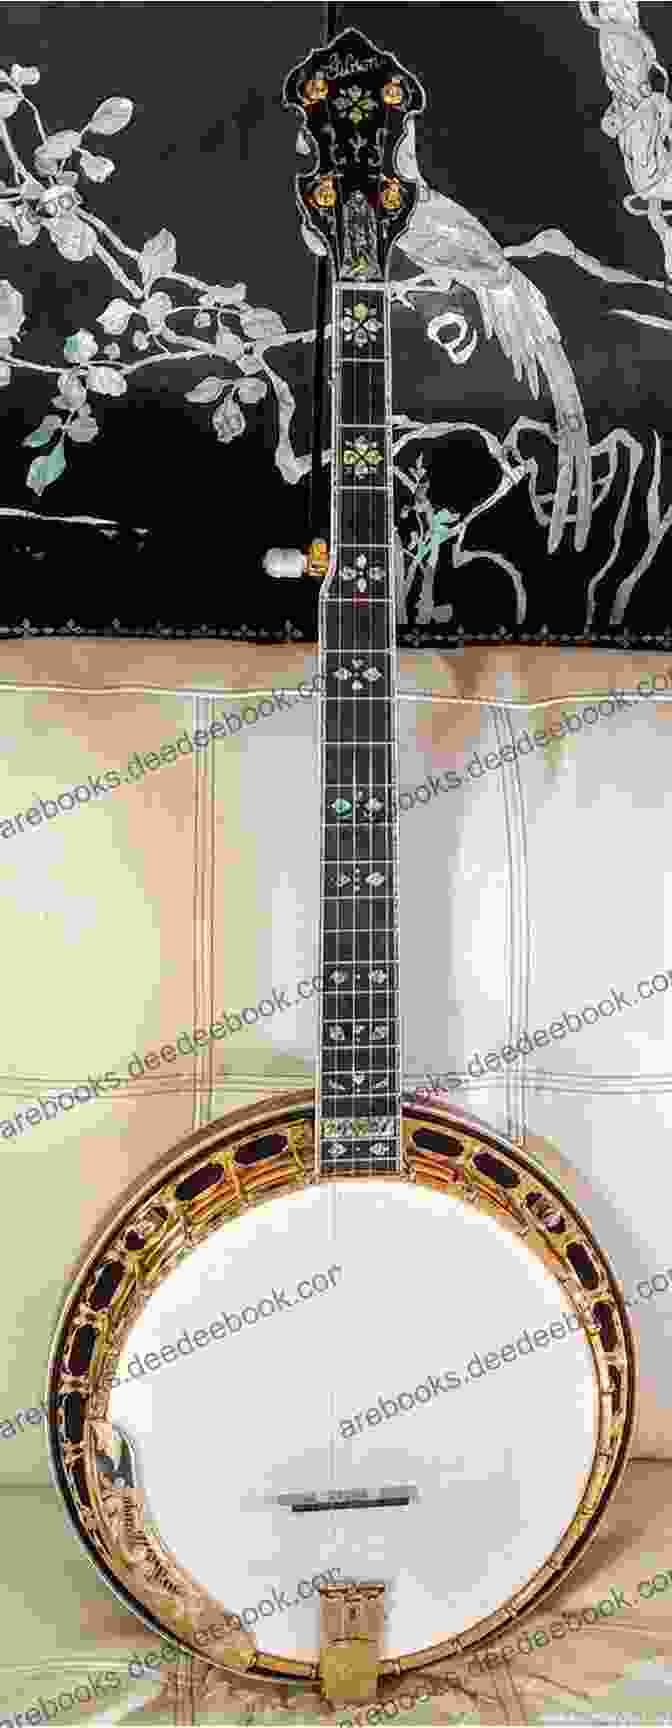 A Close Up Of A Scruggs Banjo, Highlighting Its Intricate Fingerboard And Resonator 5 String Banjo Styles For 6 String Guitar